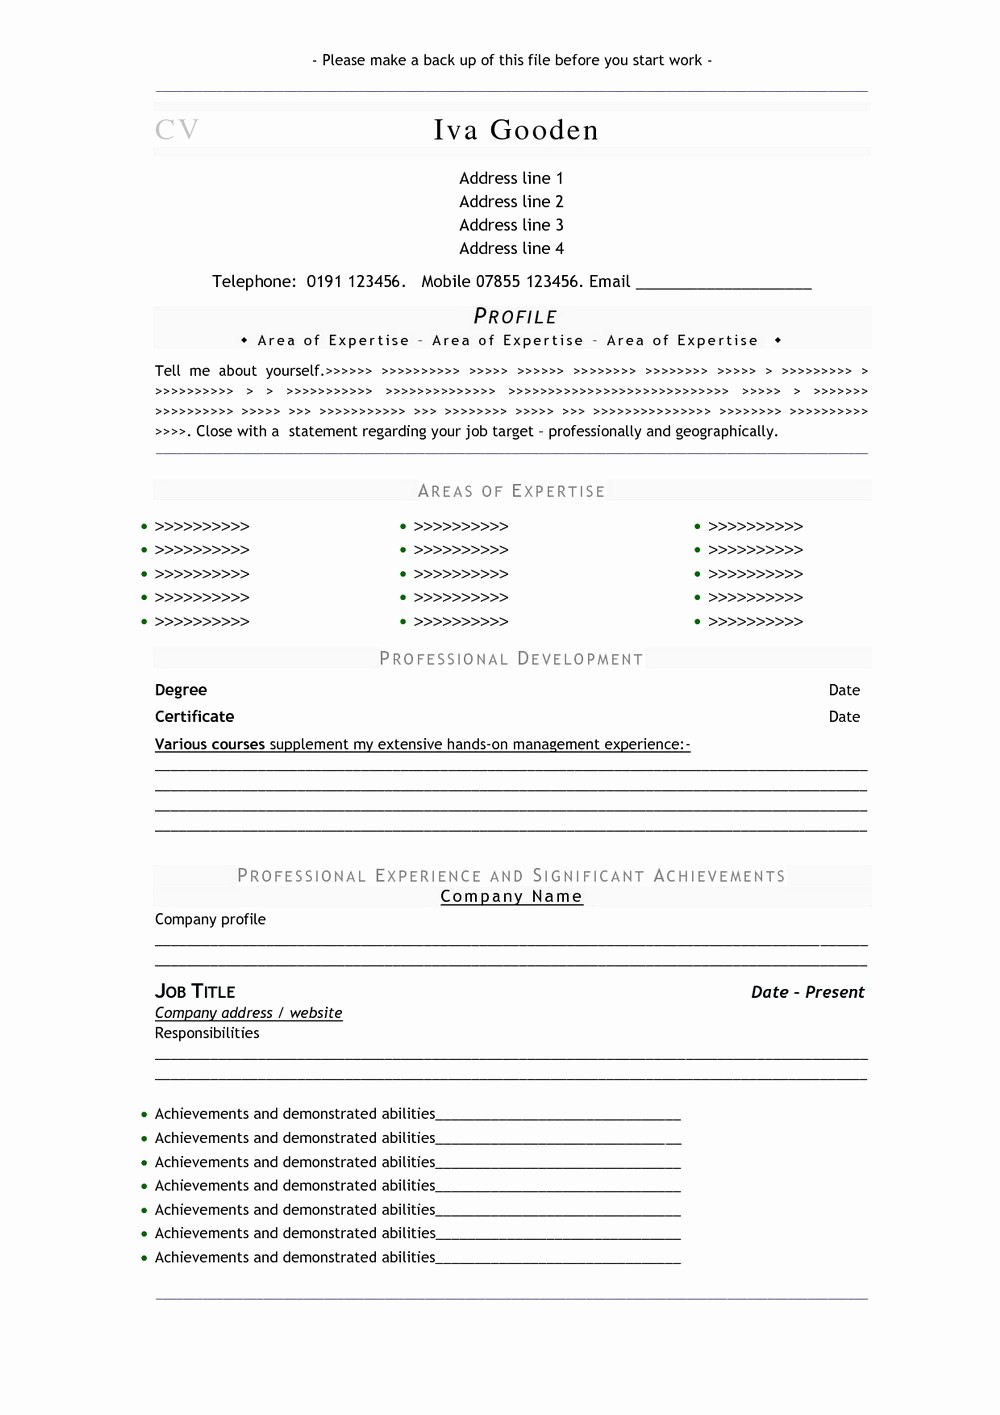 Teacher Resume Template Free Download Awesome Teacher Resume Template Free Download Resumes 400